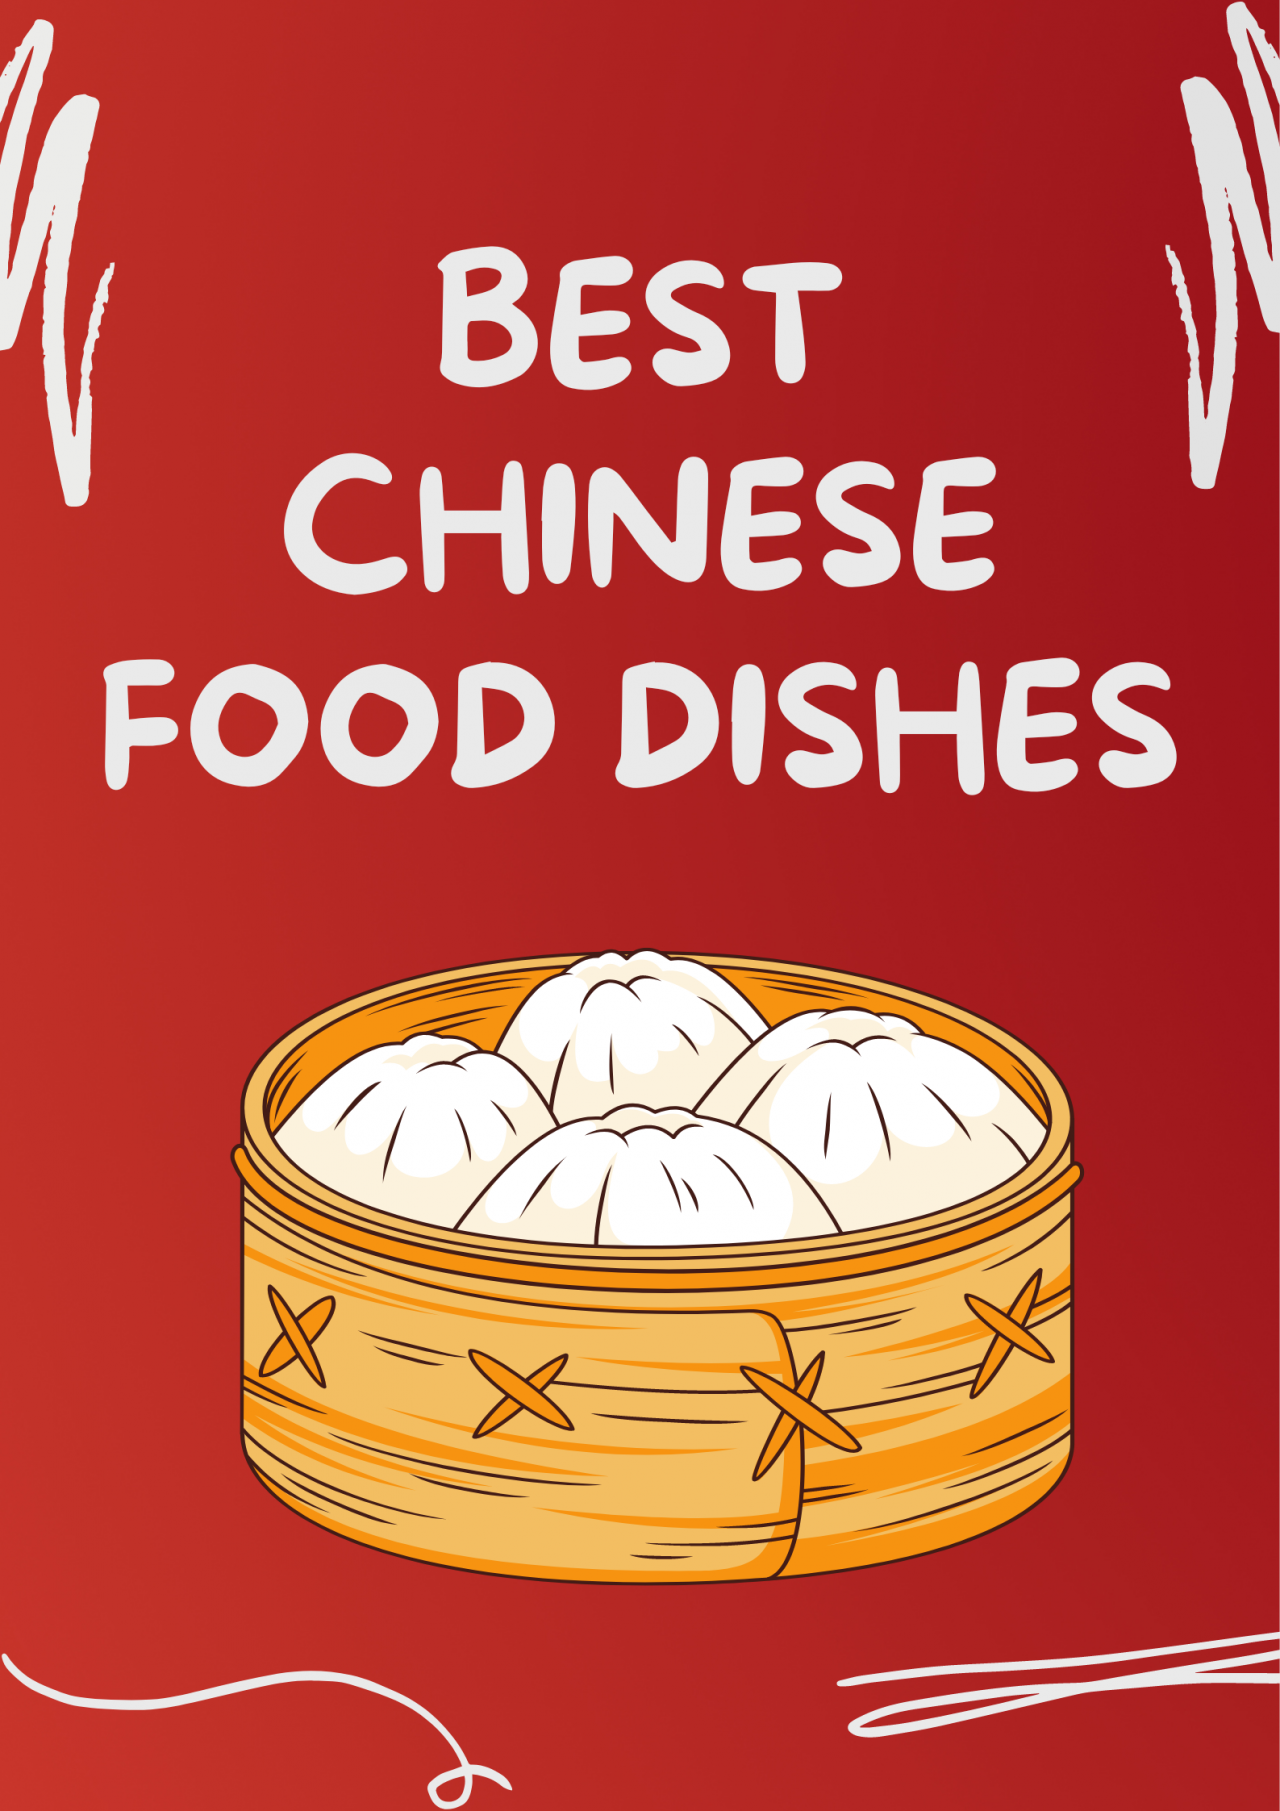 Best Chinese Food Dishes